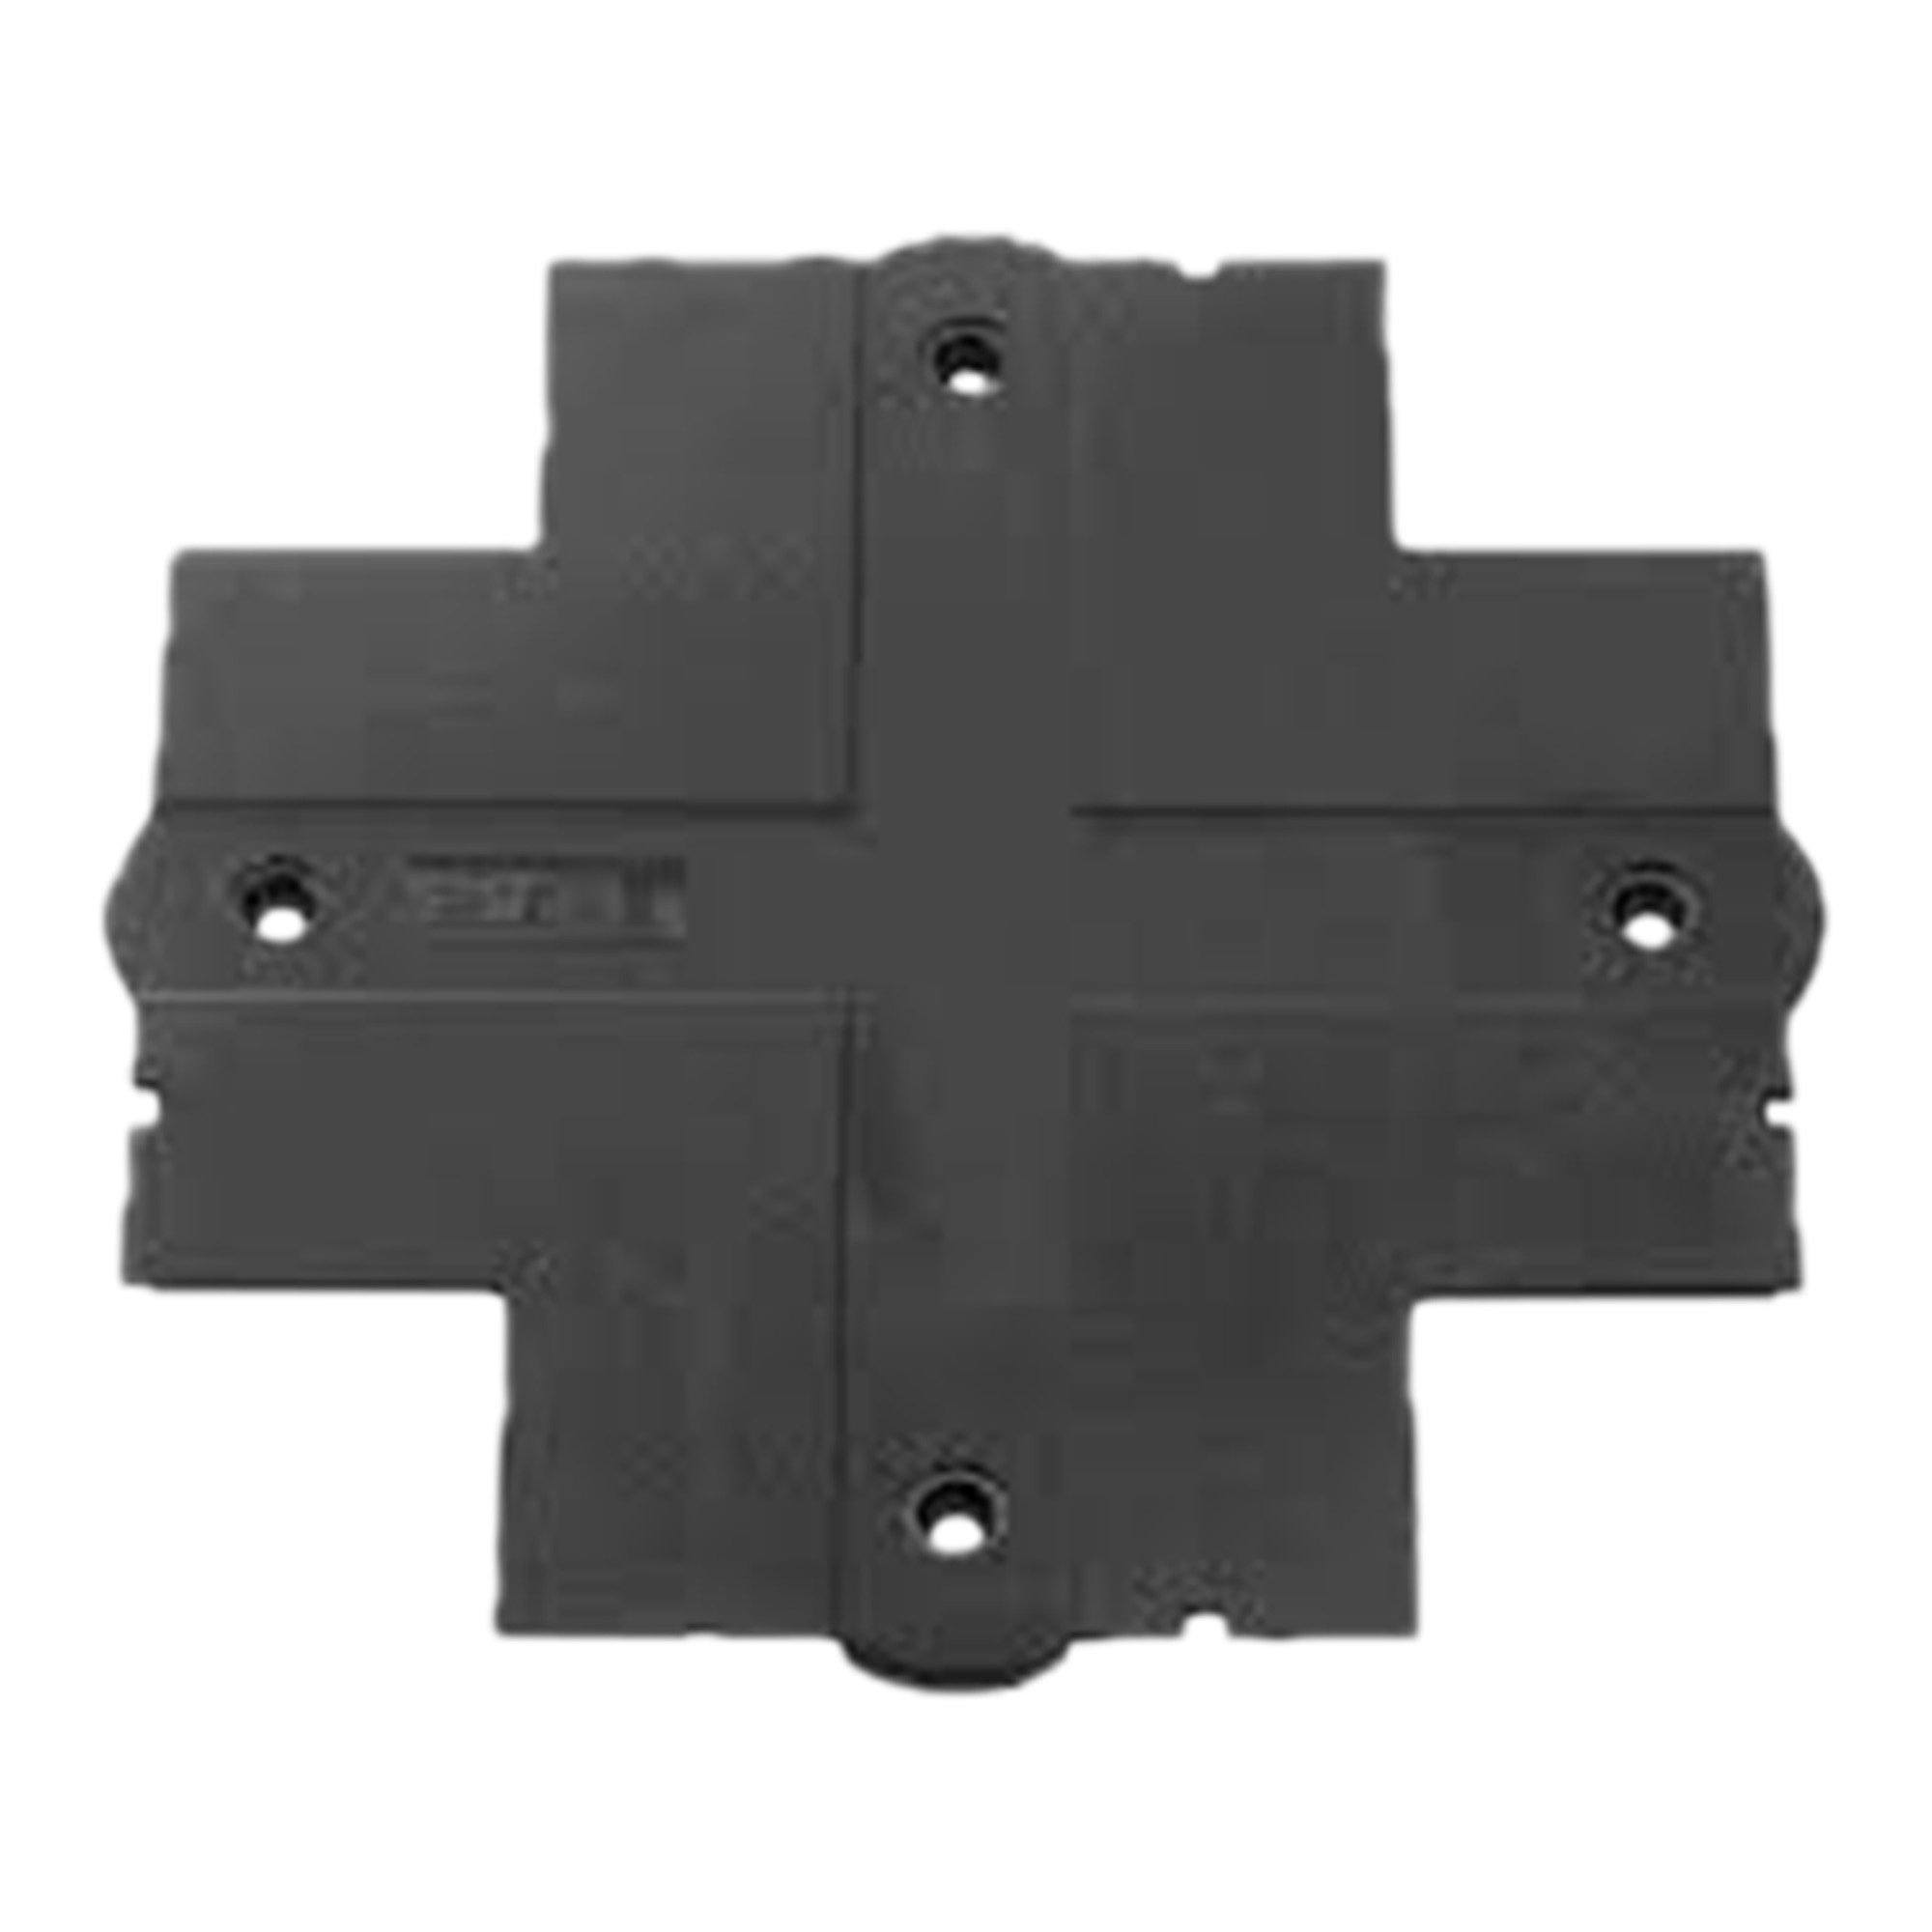 XTSF302  Triphasic Track Cover Plate For  XTS342/XTS352 Black